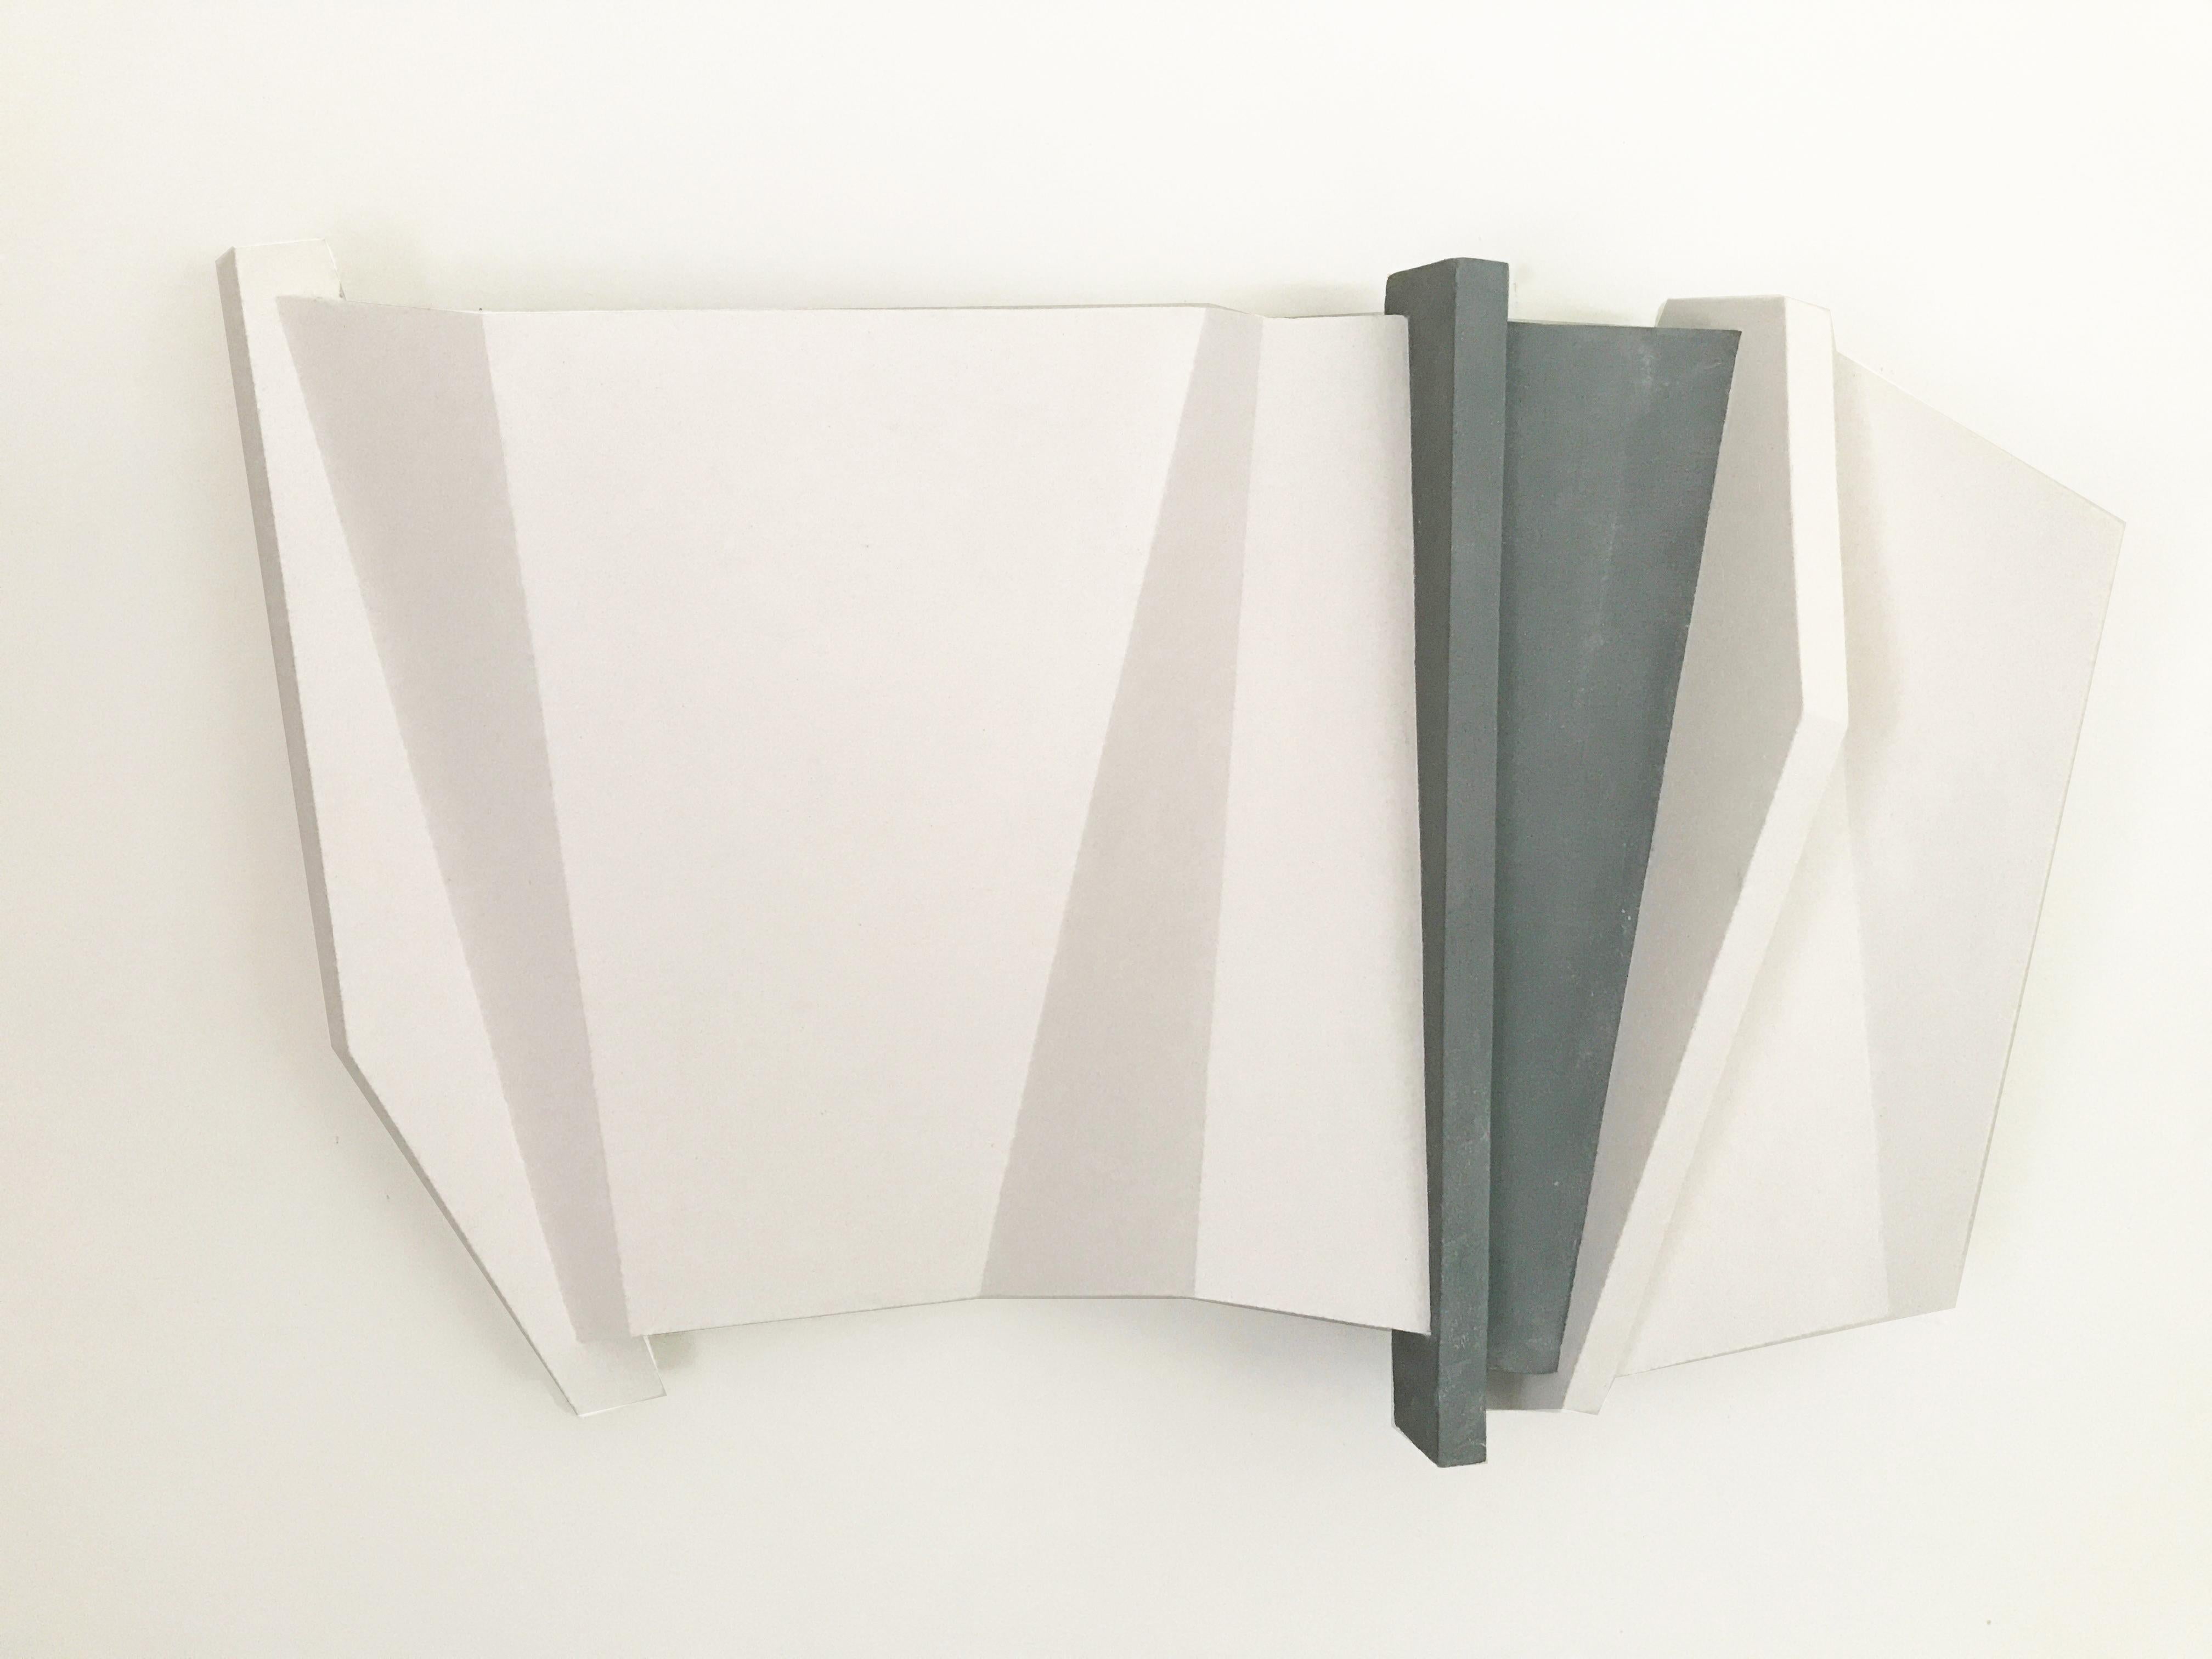 Dai Ban Abstract Sculpture - Rained On (Abstract Minimalist Horizontal White and Grey Wall Sculpture)